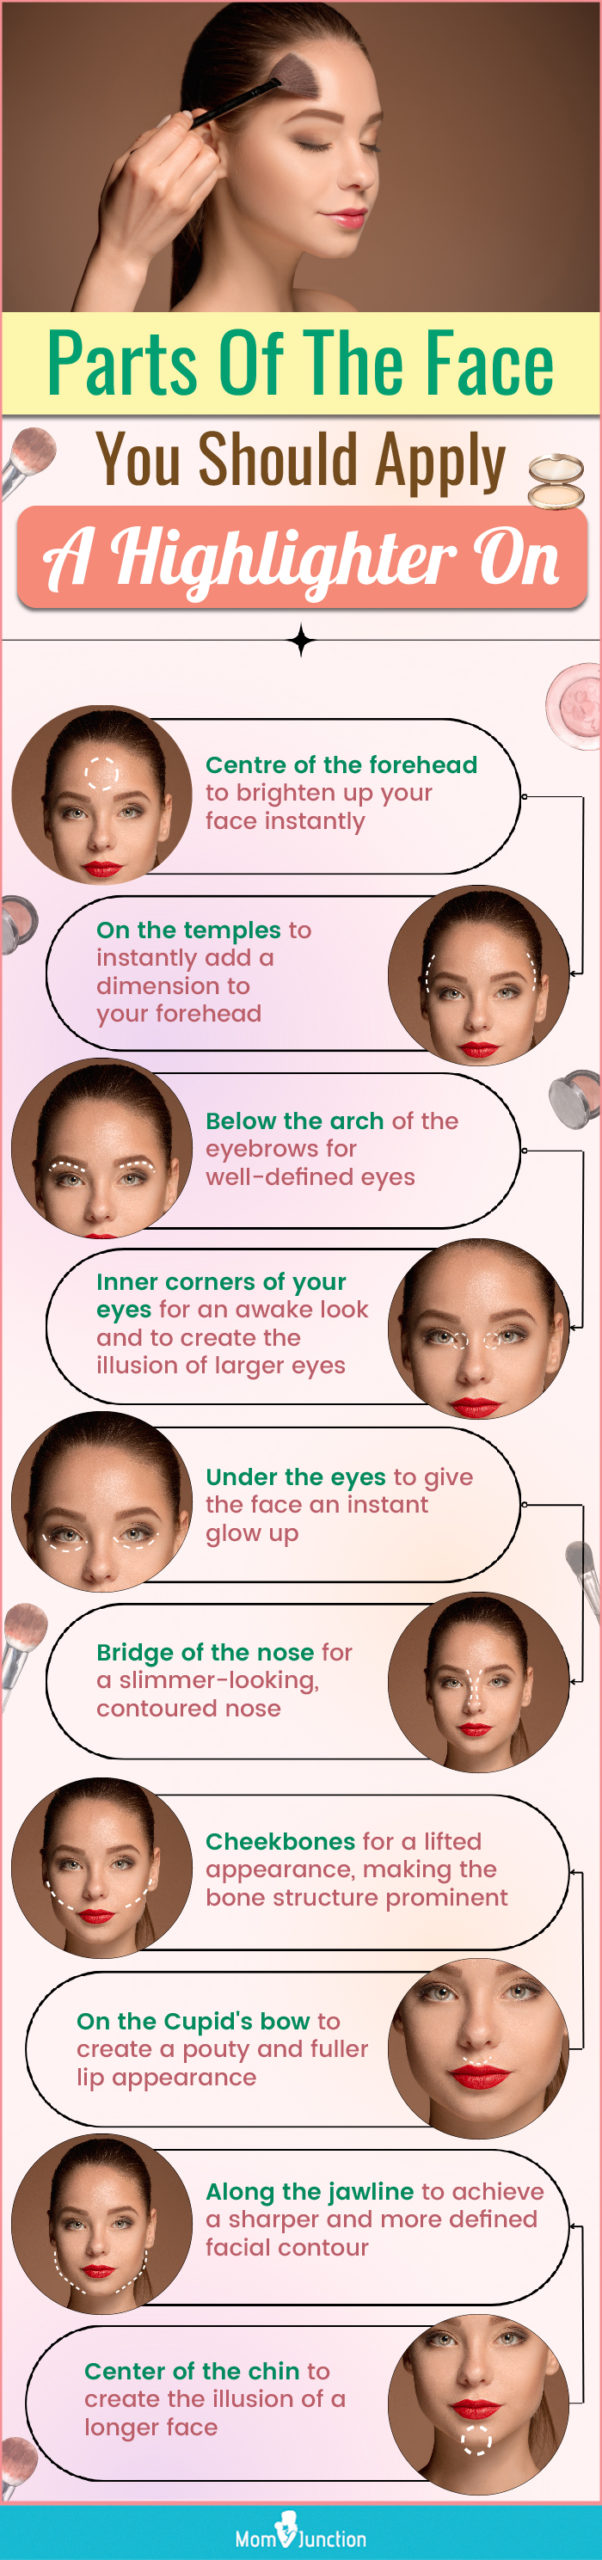 Parts Of The Face You Should Apply A Highlighter On (infographic)